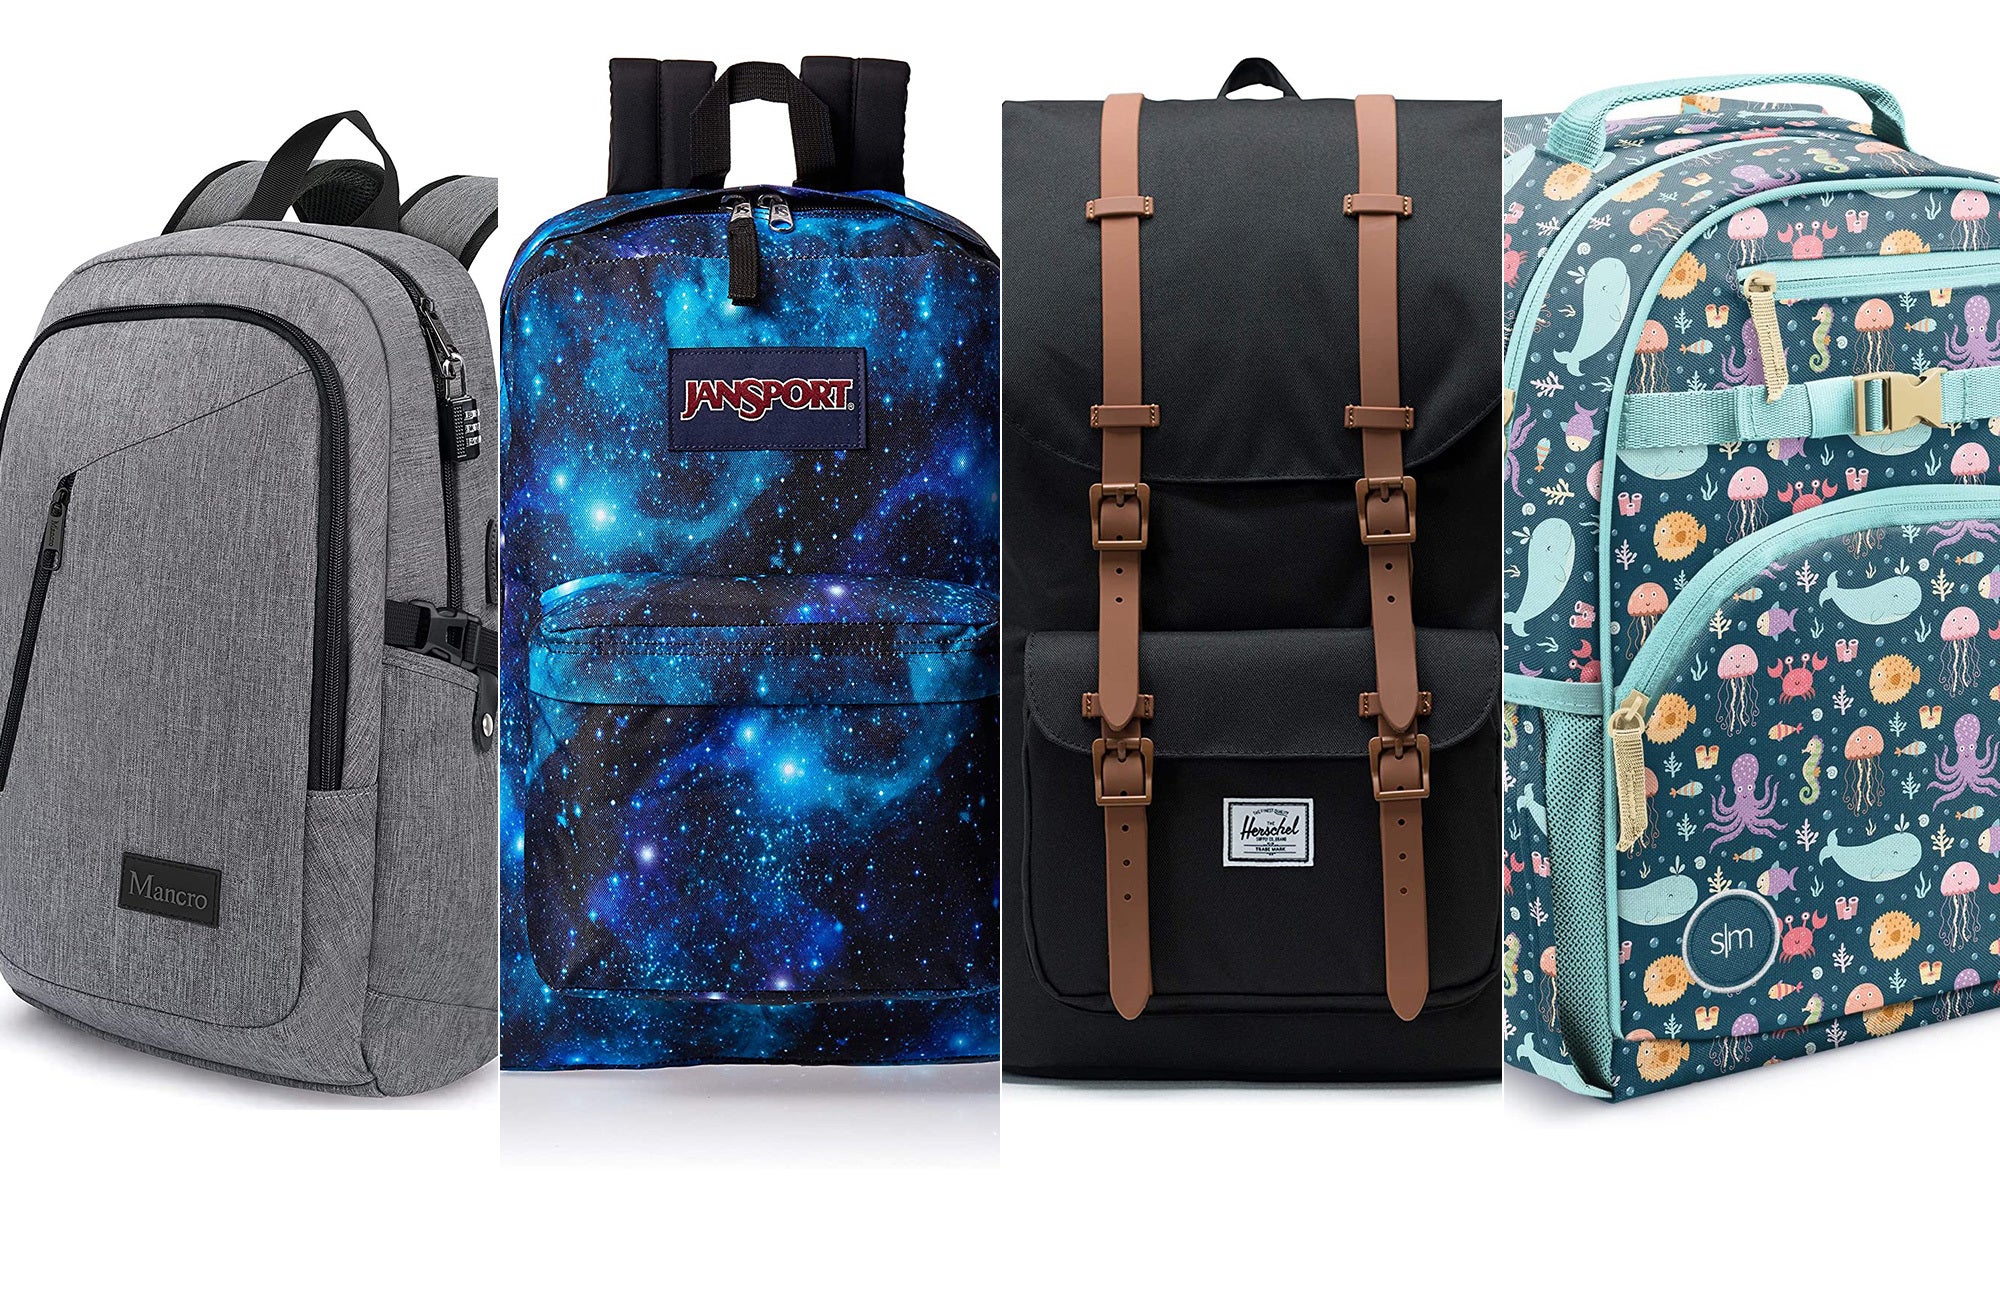 I Would Rather Be Playing  Gaming Backpack Rucksack School Bag 